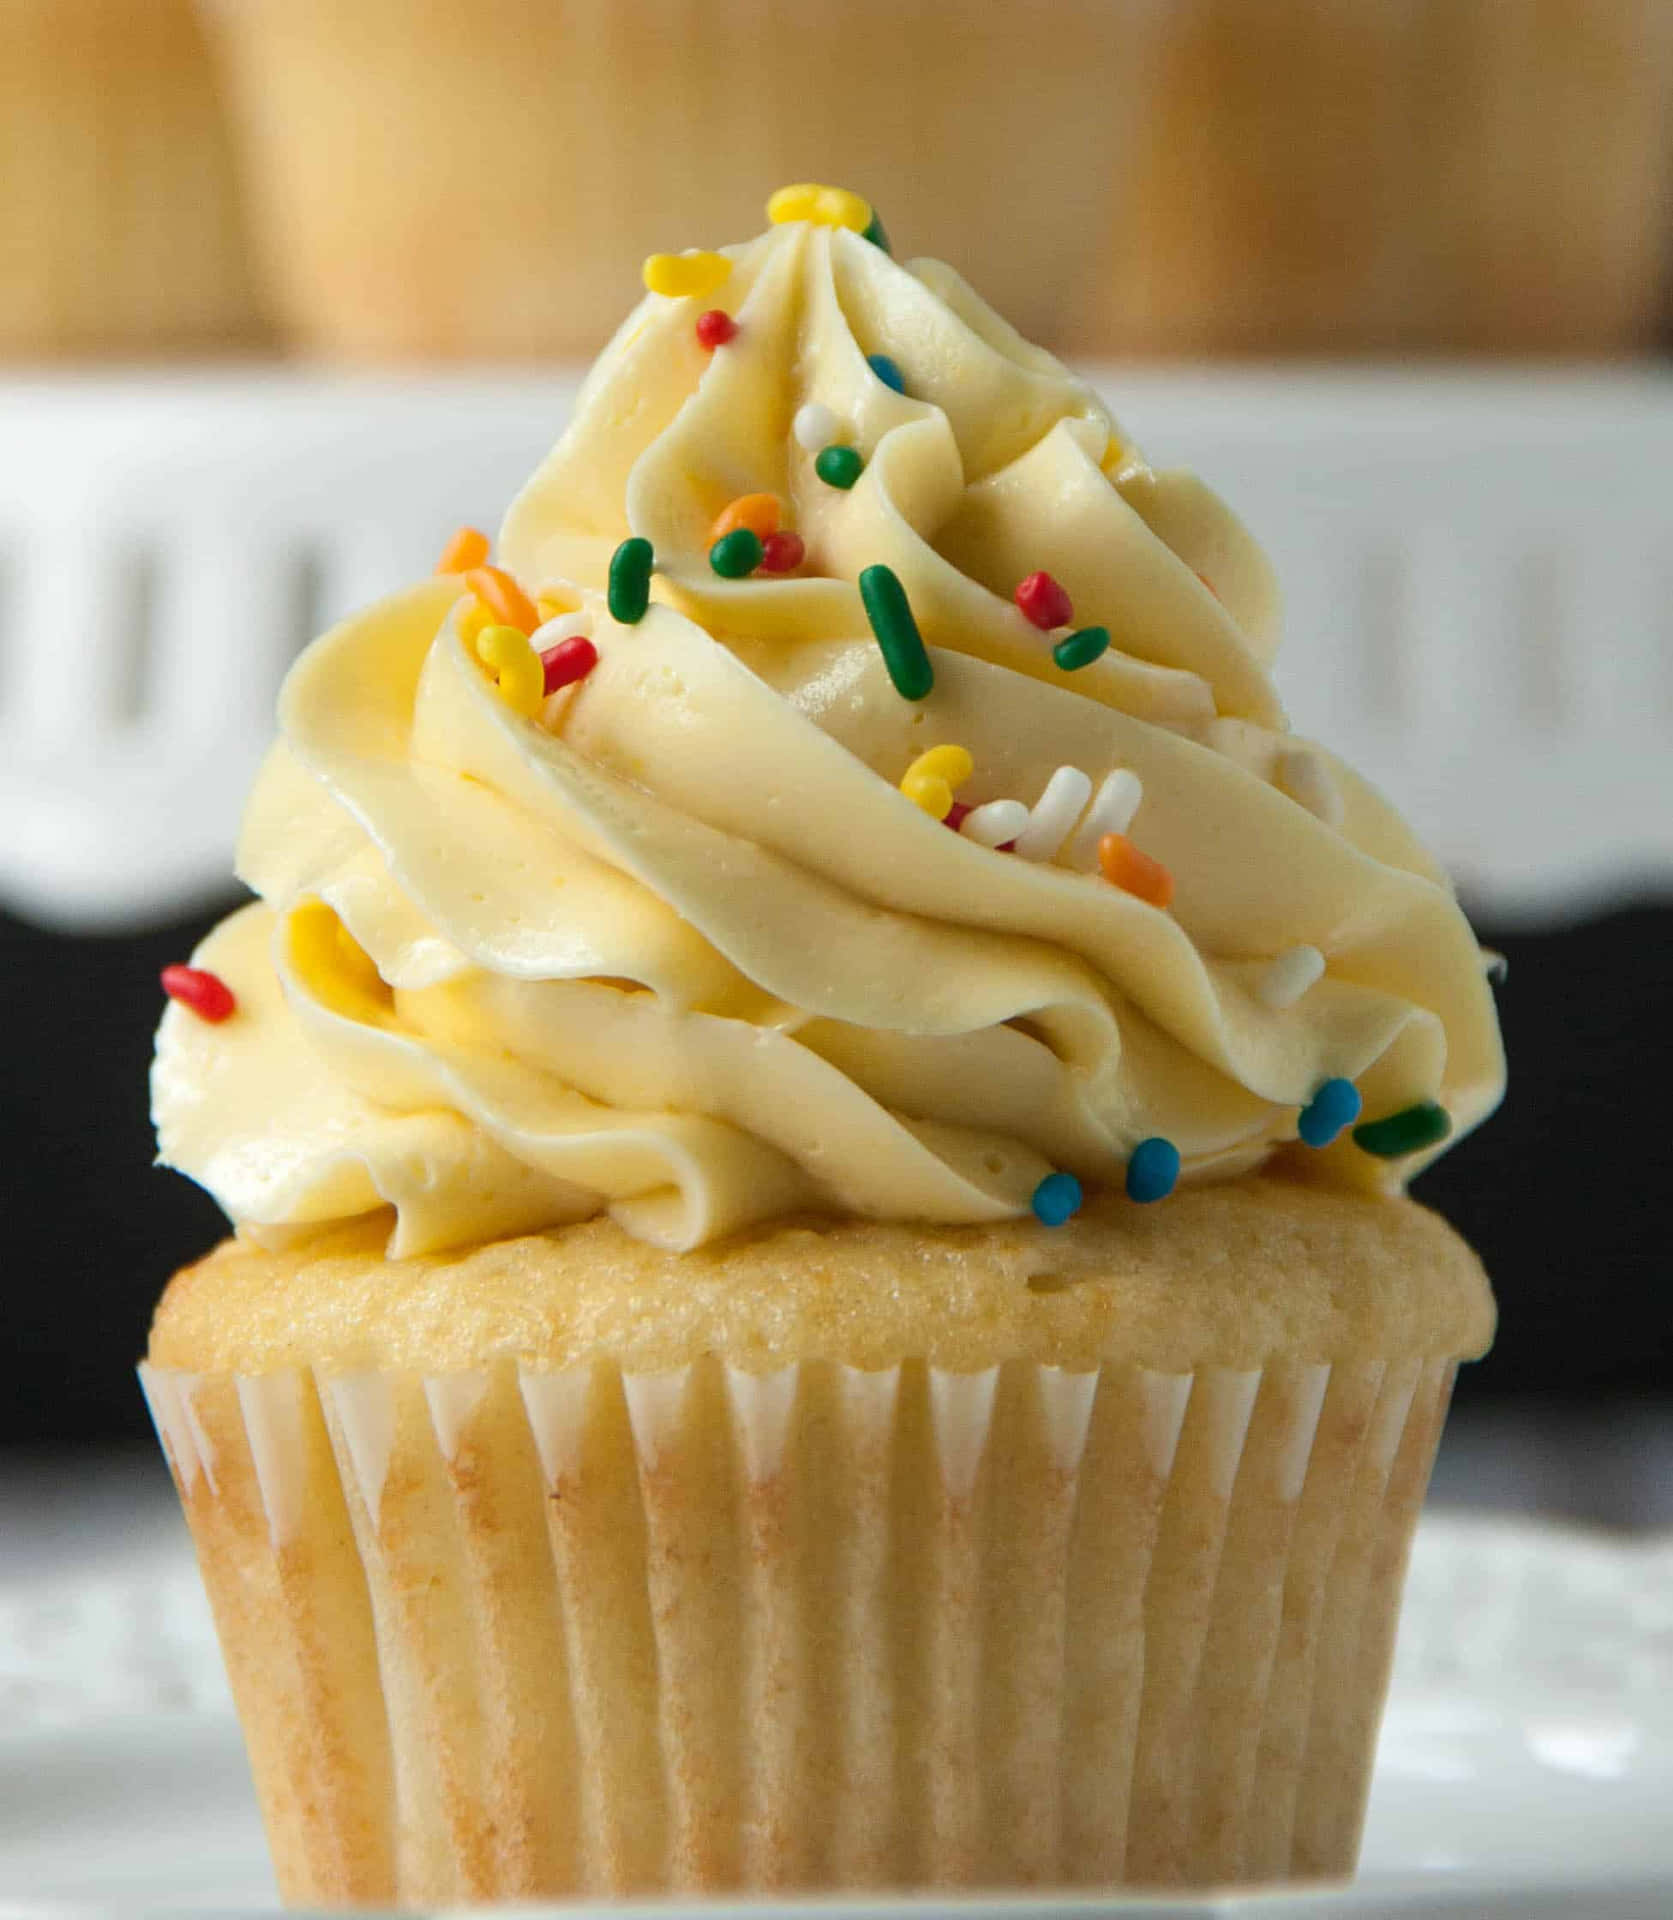 Rich and creamy buttercream perfect for cupcakes, cakes, and other sweet treats. Wallpaper